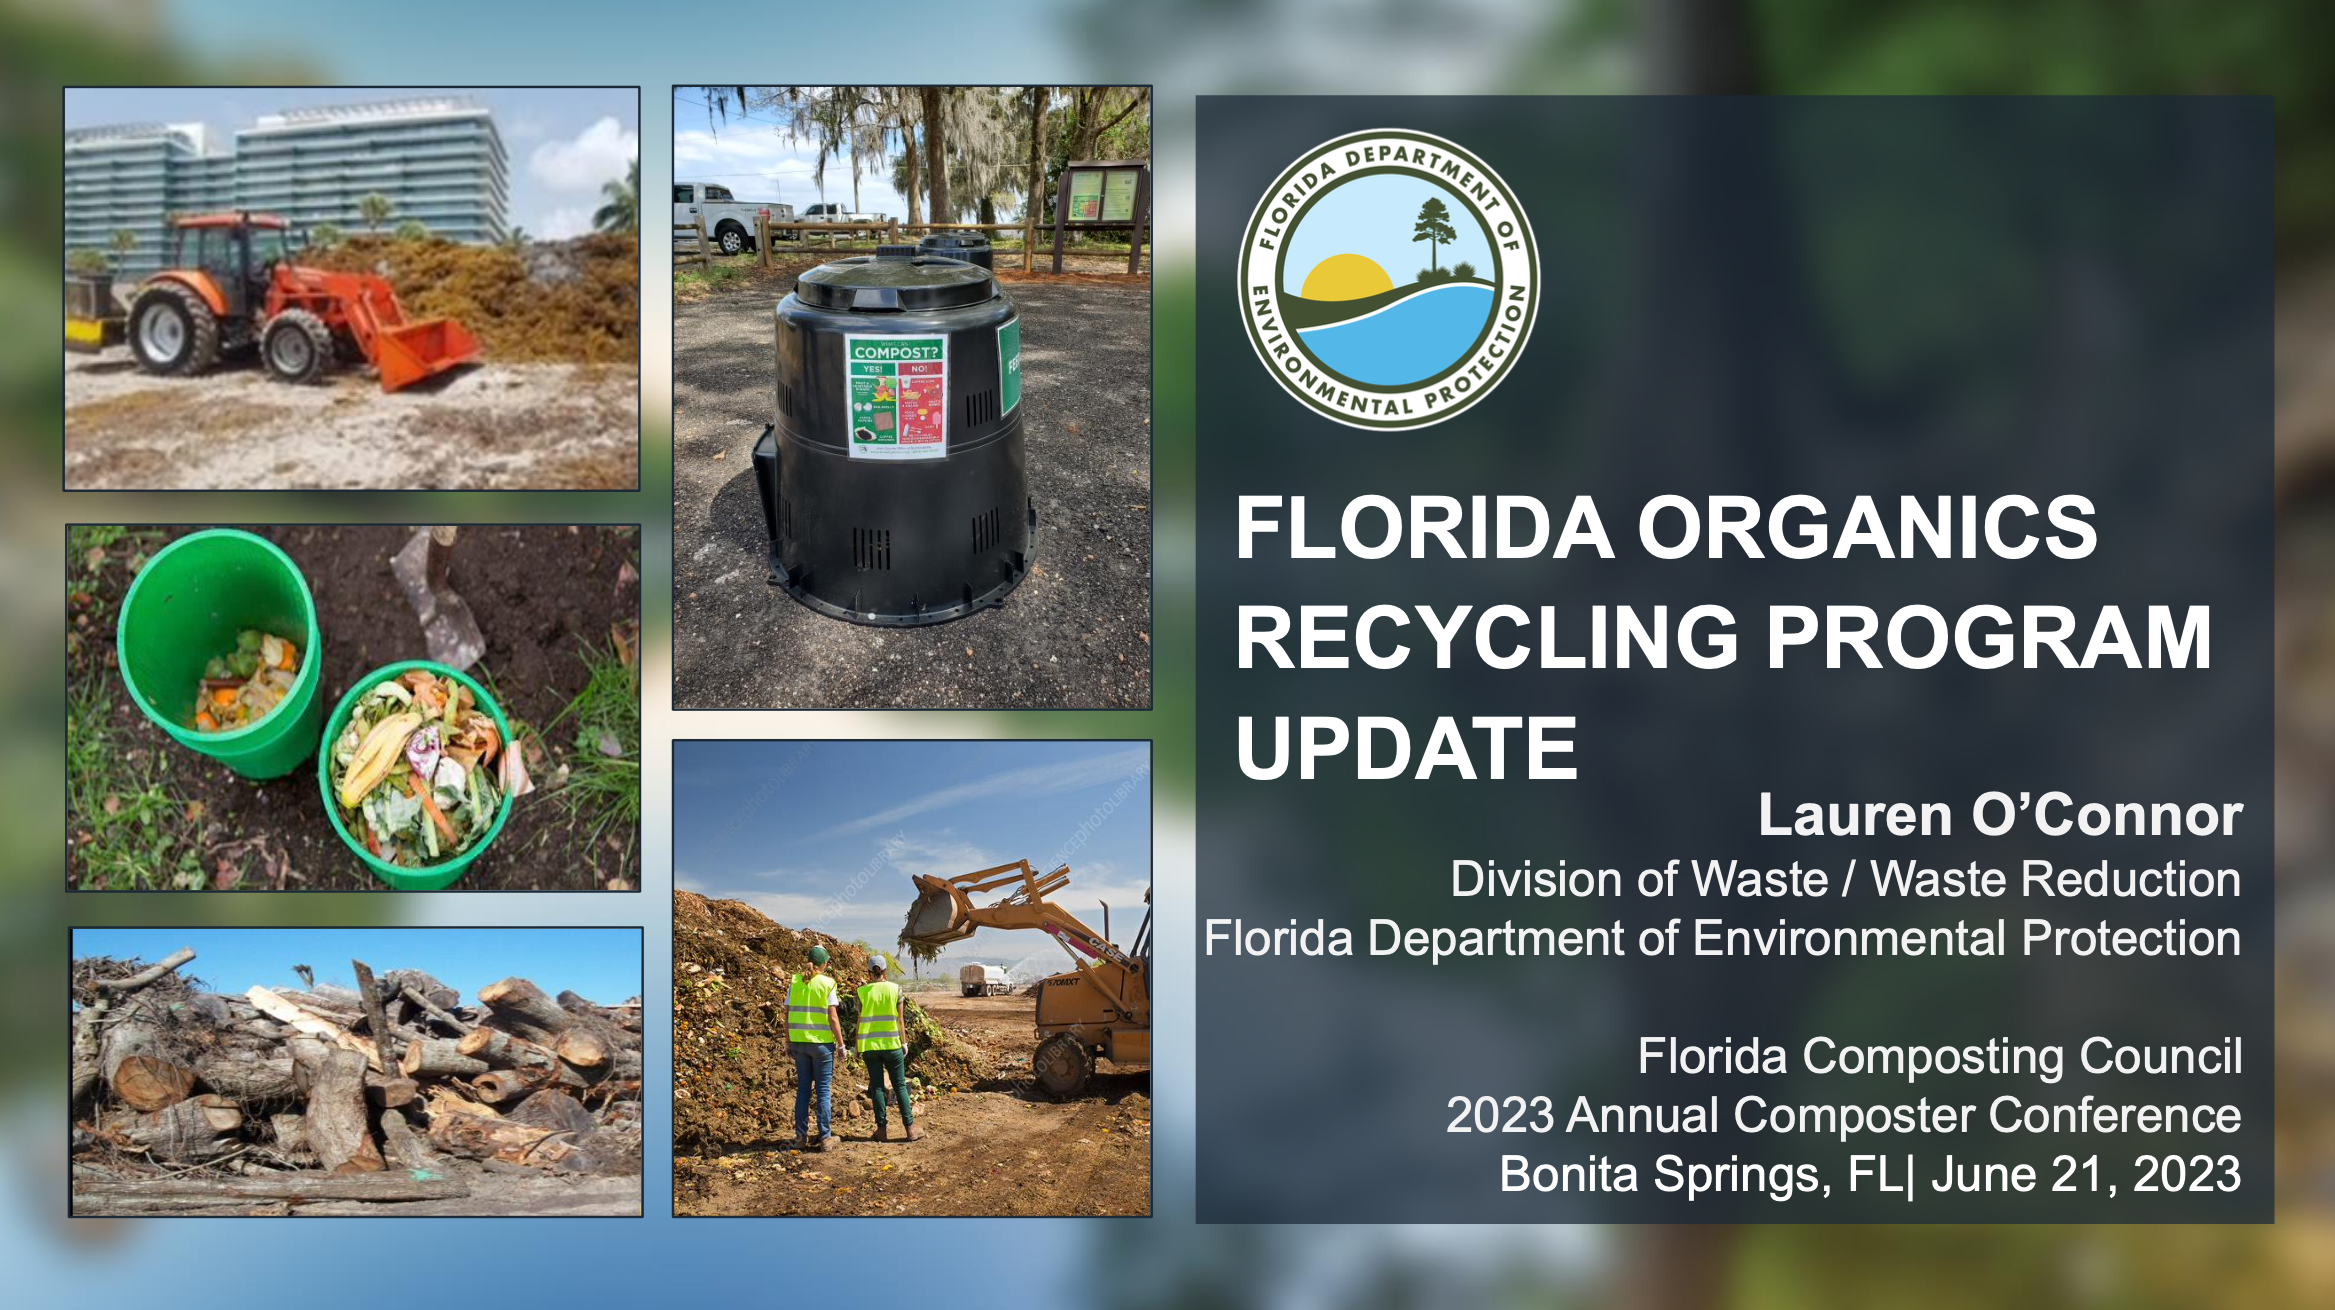 FDEP - RECYCLING IN FLORIDA